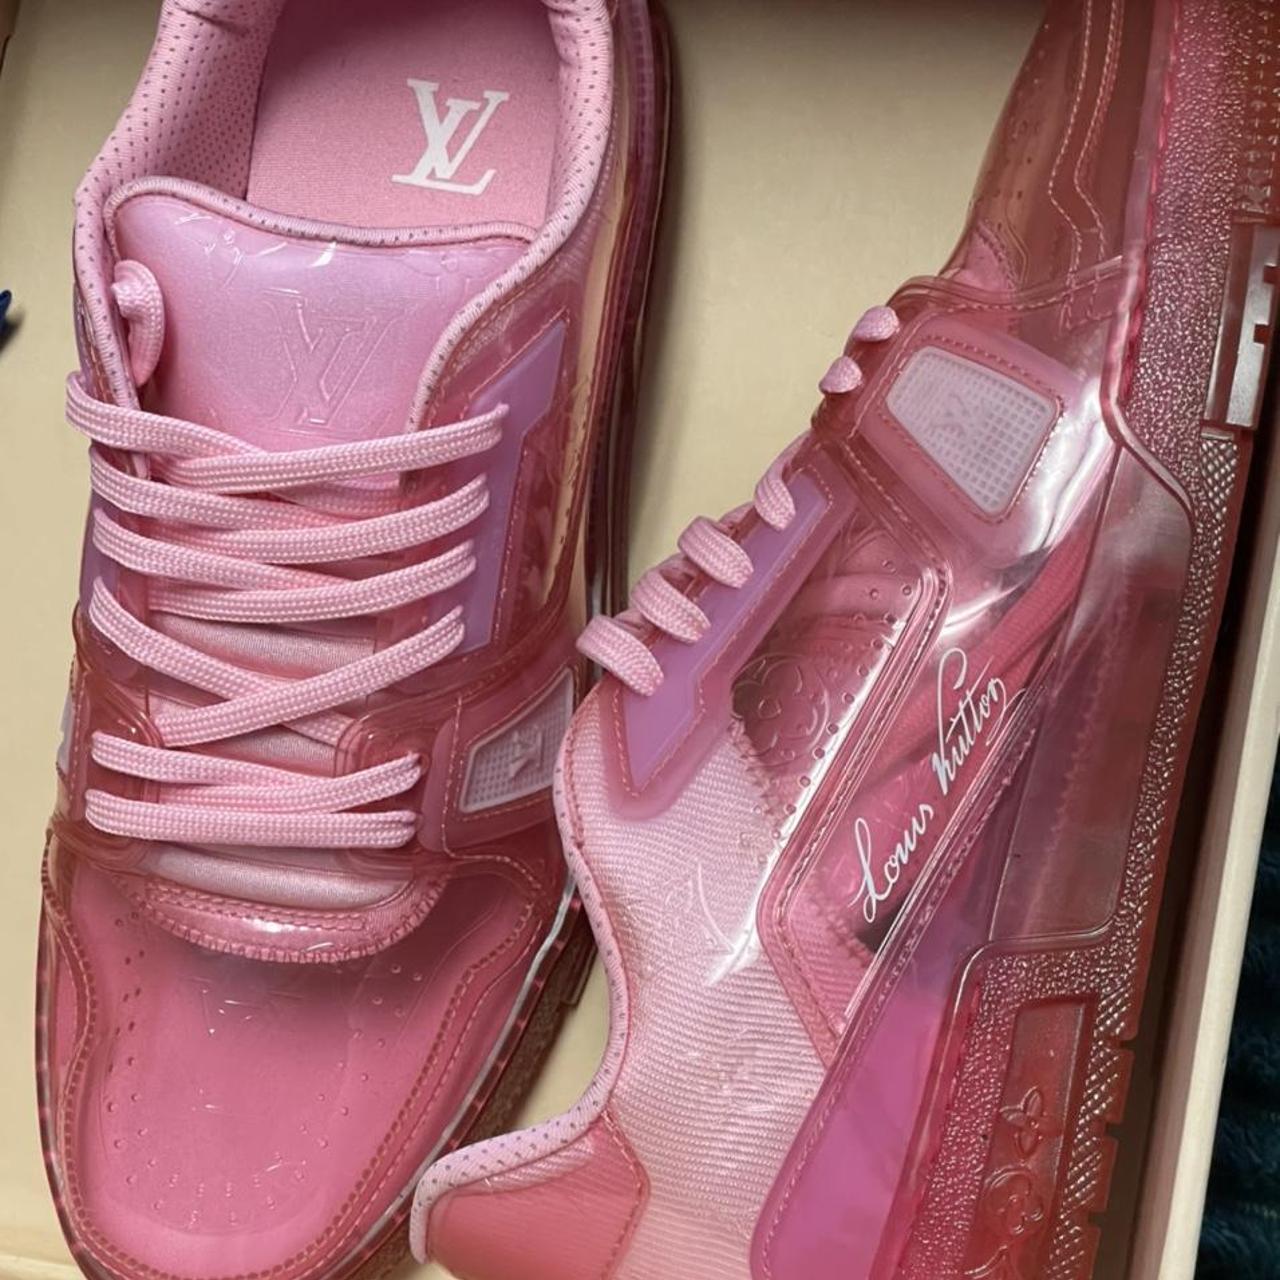 Trainers Louis Vuitton Pink size 38.5 EU in Plastic - 21809569